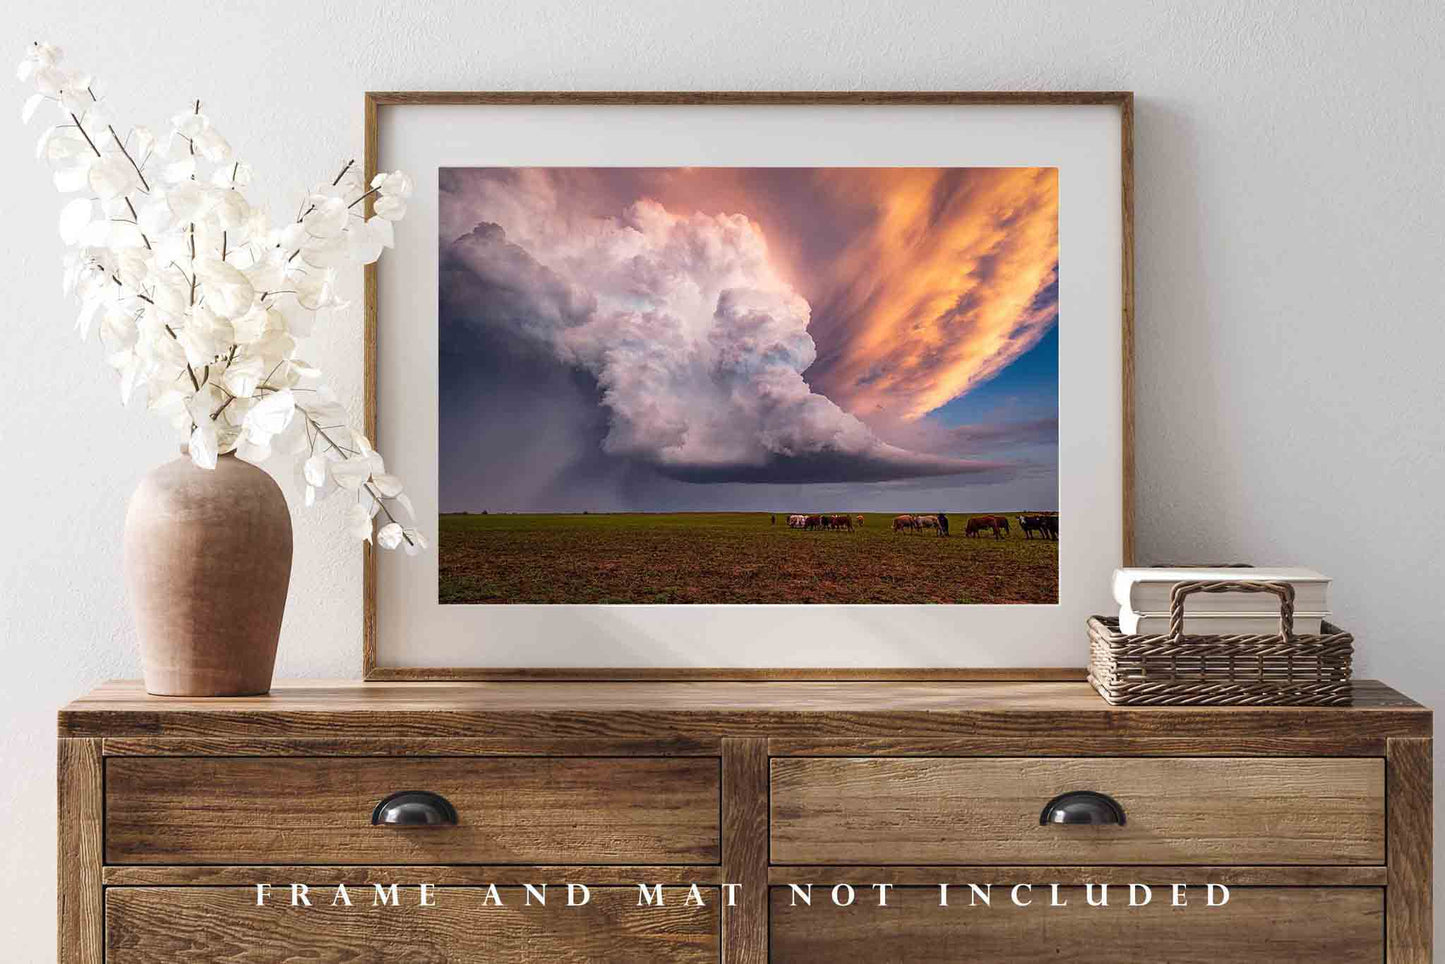 Storm Photography Print - Picture of Supercell Thunderstorm Over Field with Cows in Kansas - Weather Wall Art Photo Artwork Decor